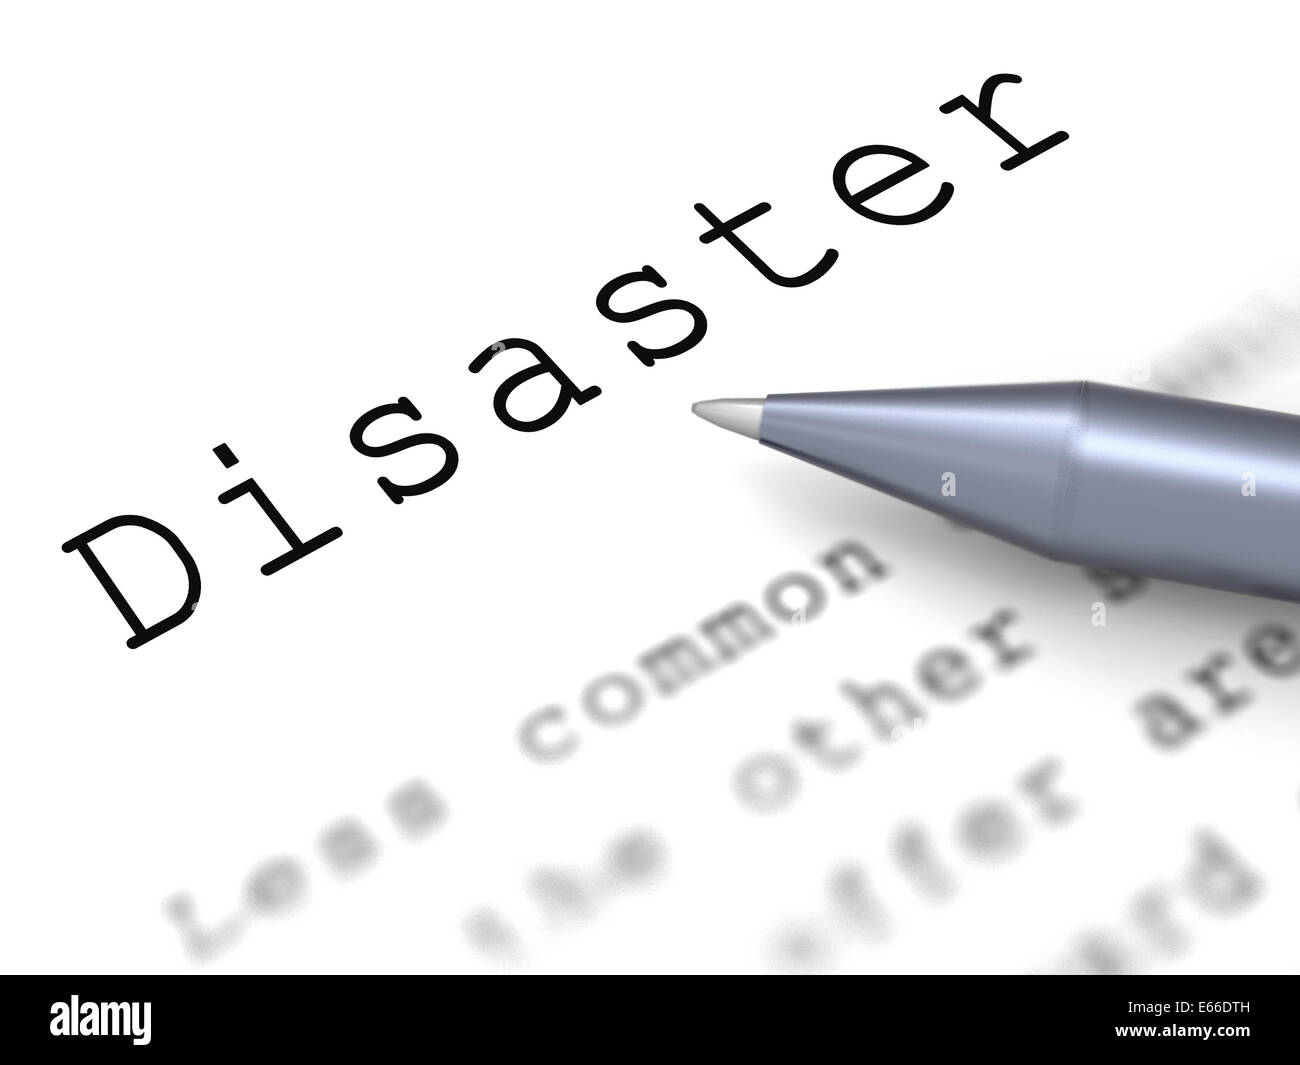 Disaster Word Meaning Emergency Calamity And Crisis Stock Photo